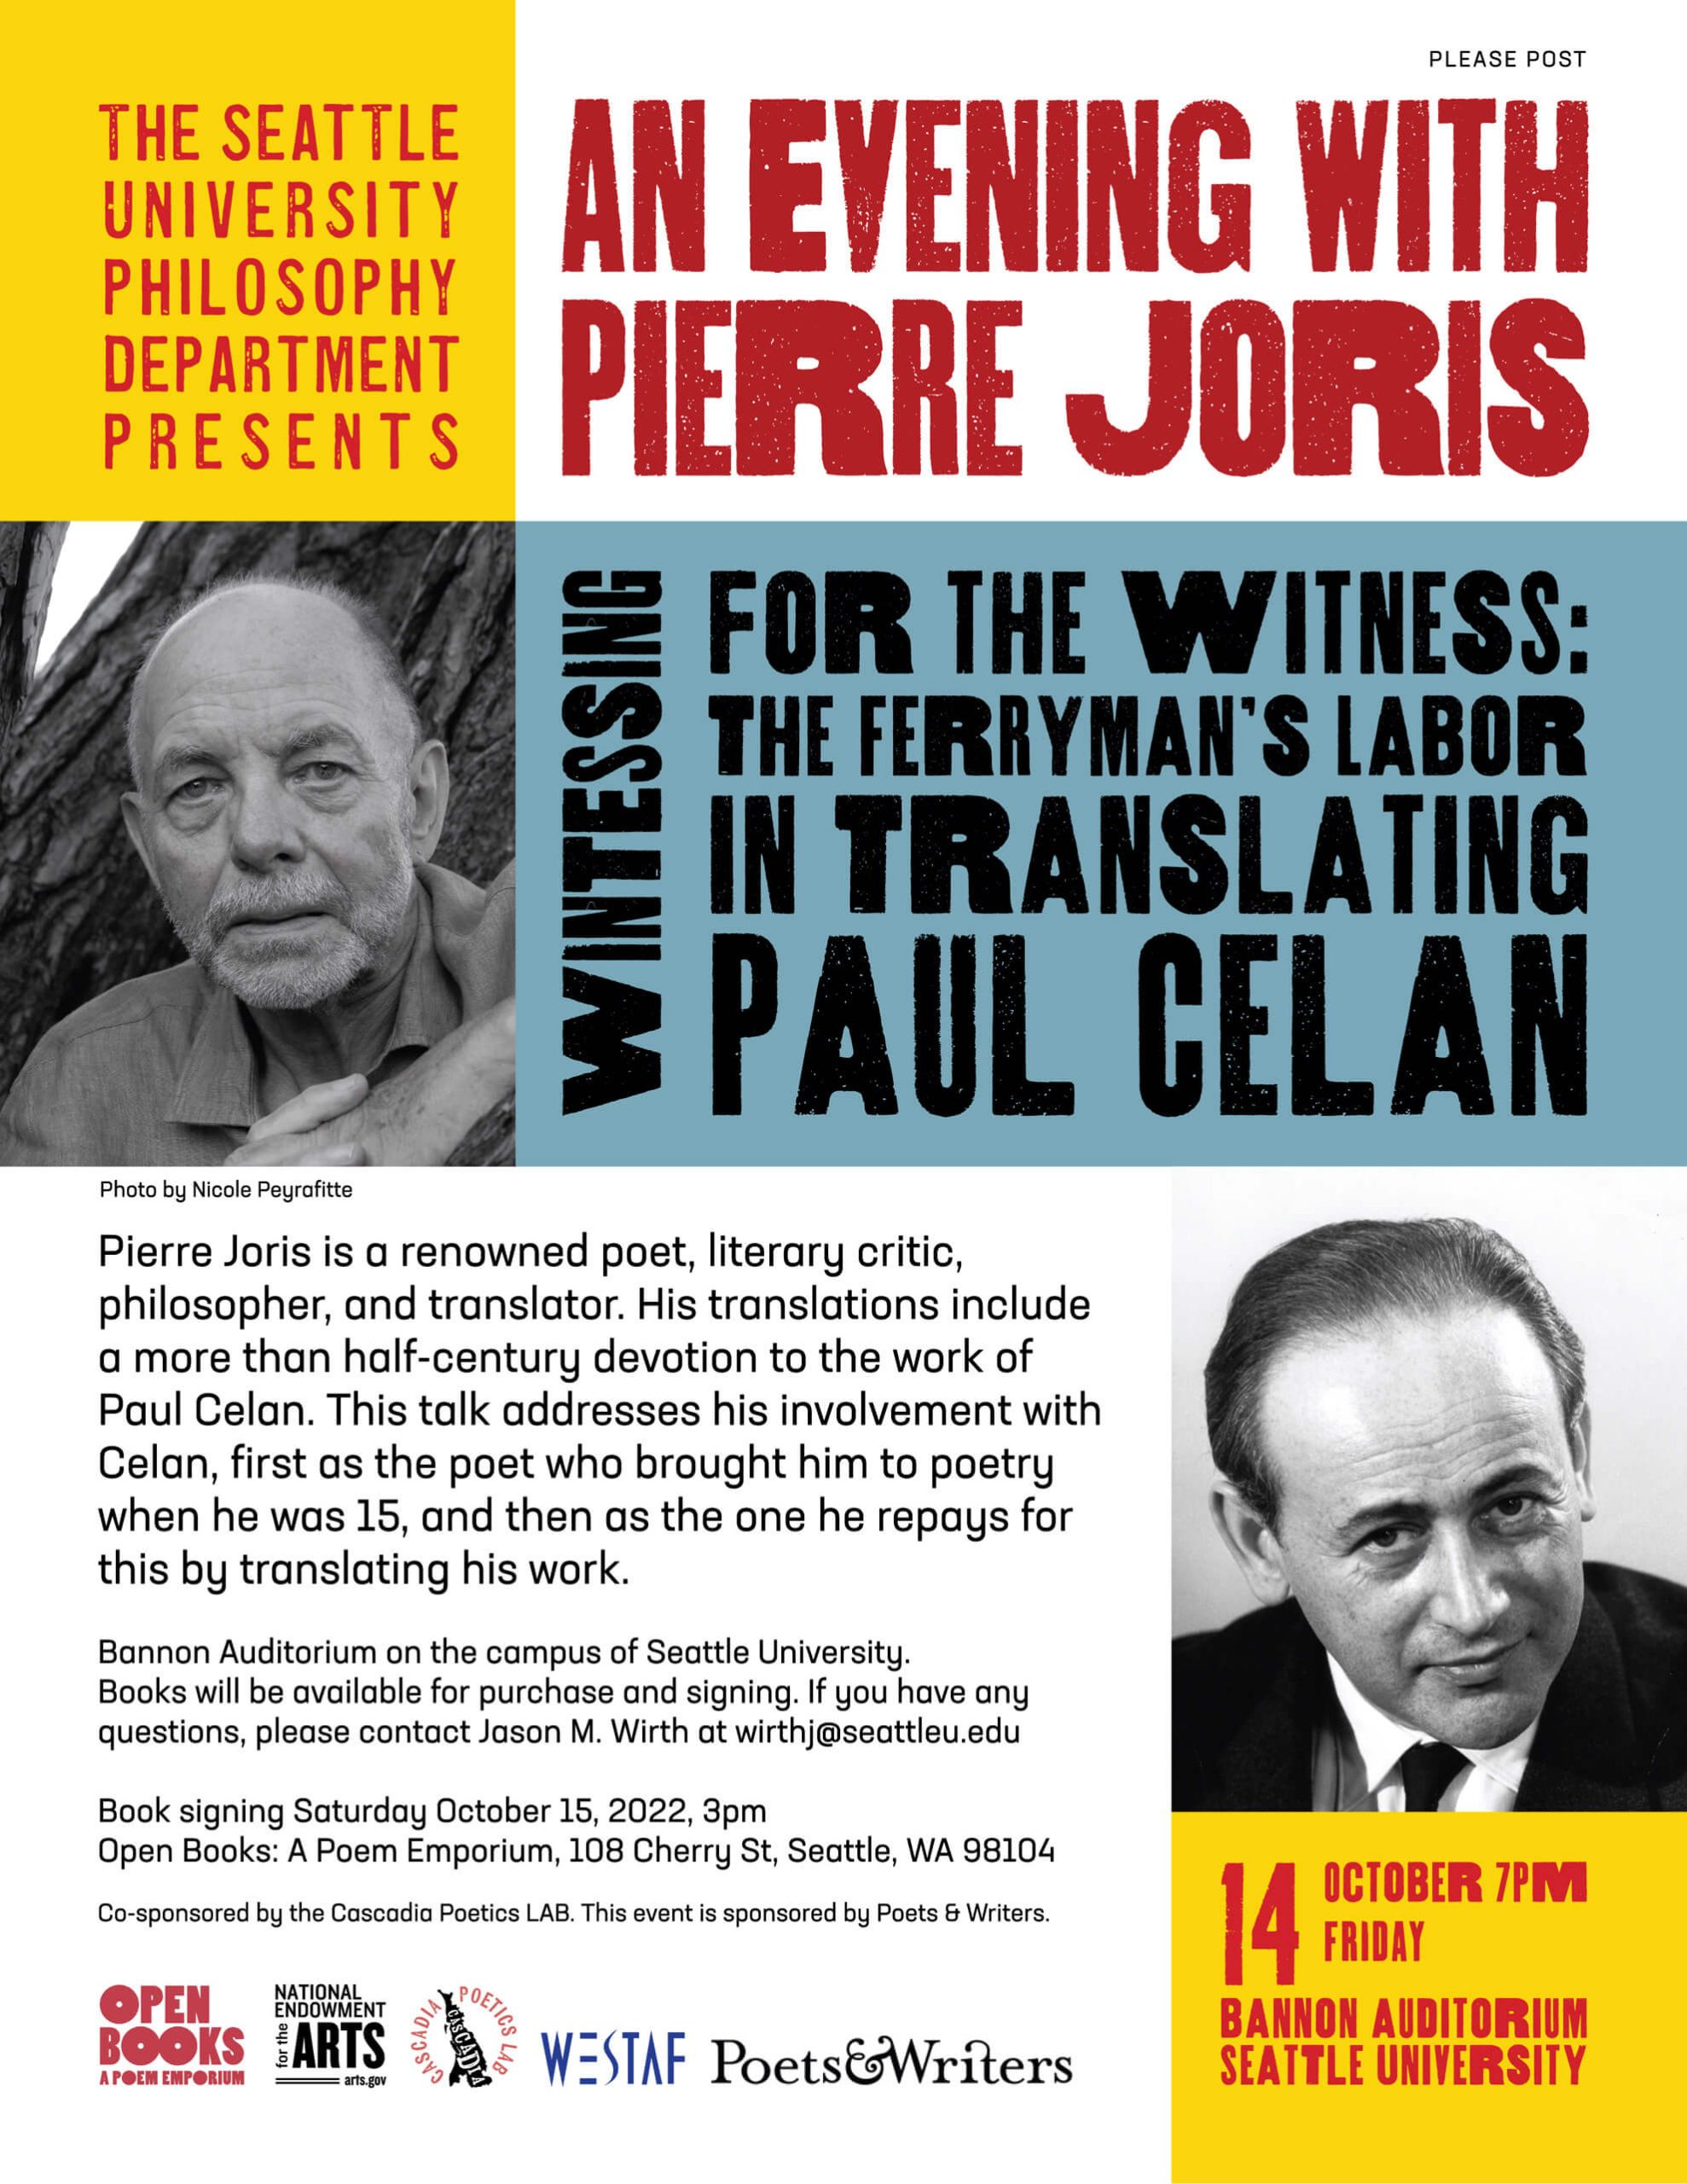 Poster for An Evening With Pierre Joris Witnessting for the Witness the Ferrymans Labor in Translating Paul Celan